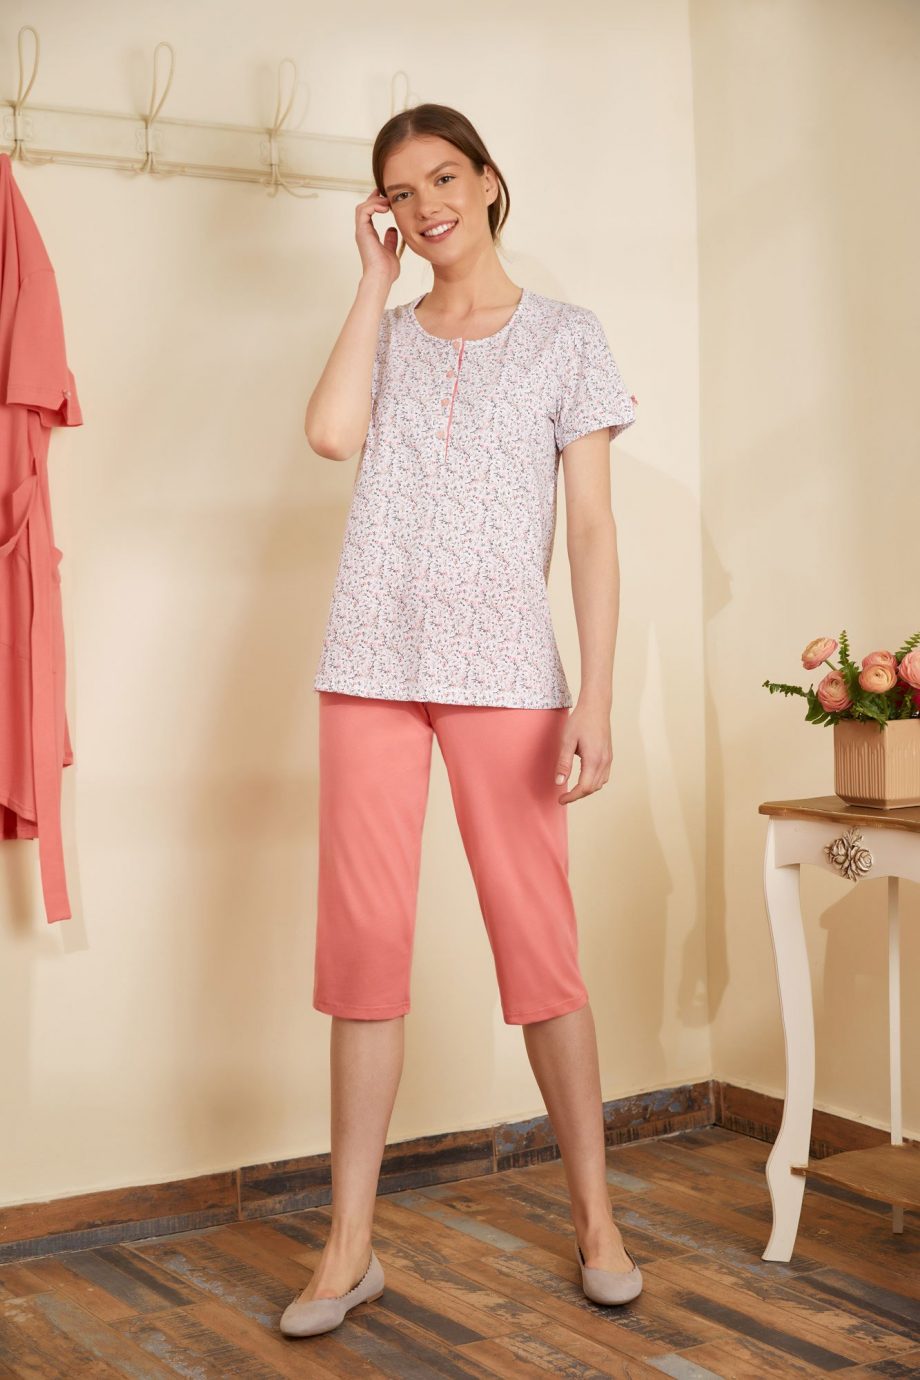 Women’s Floral Pyjamas with Buttons